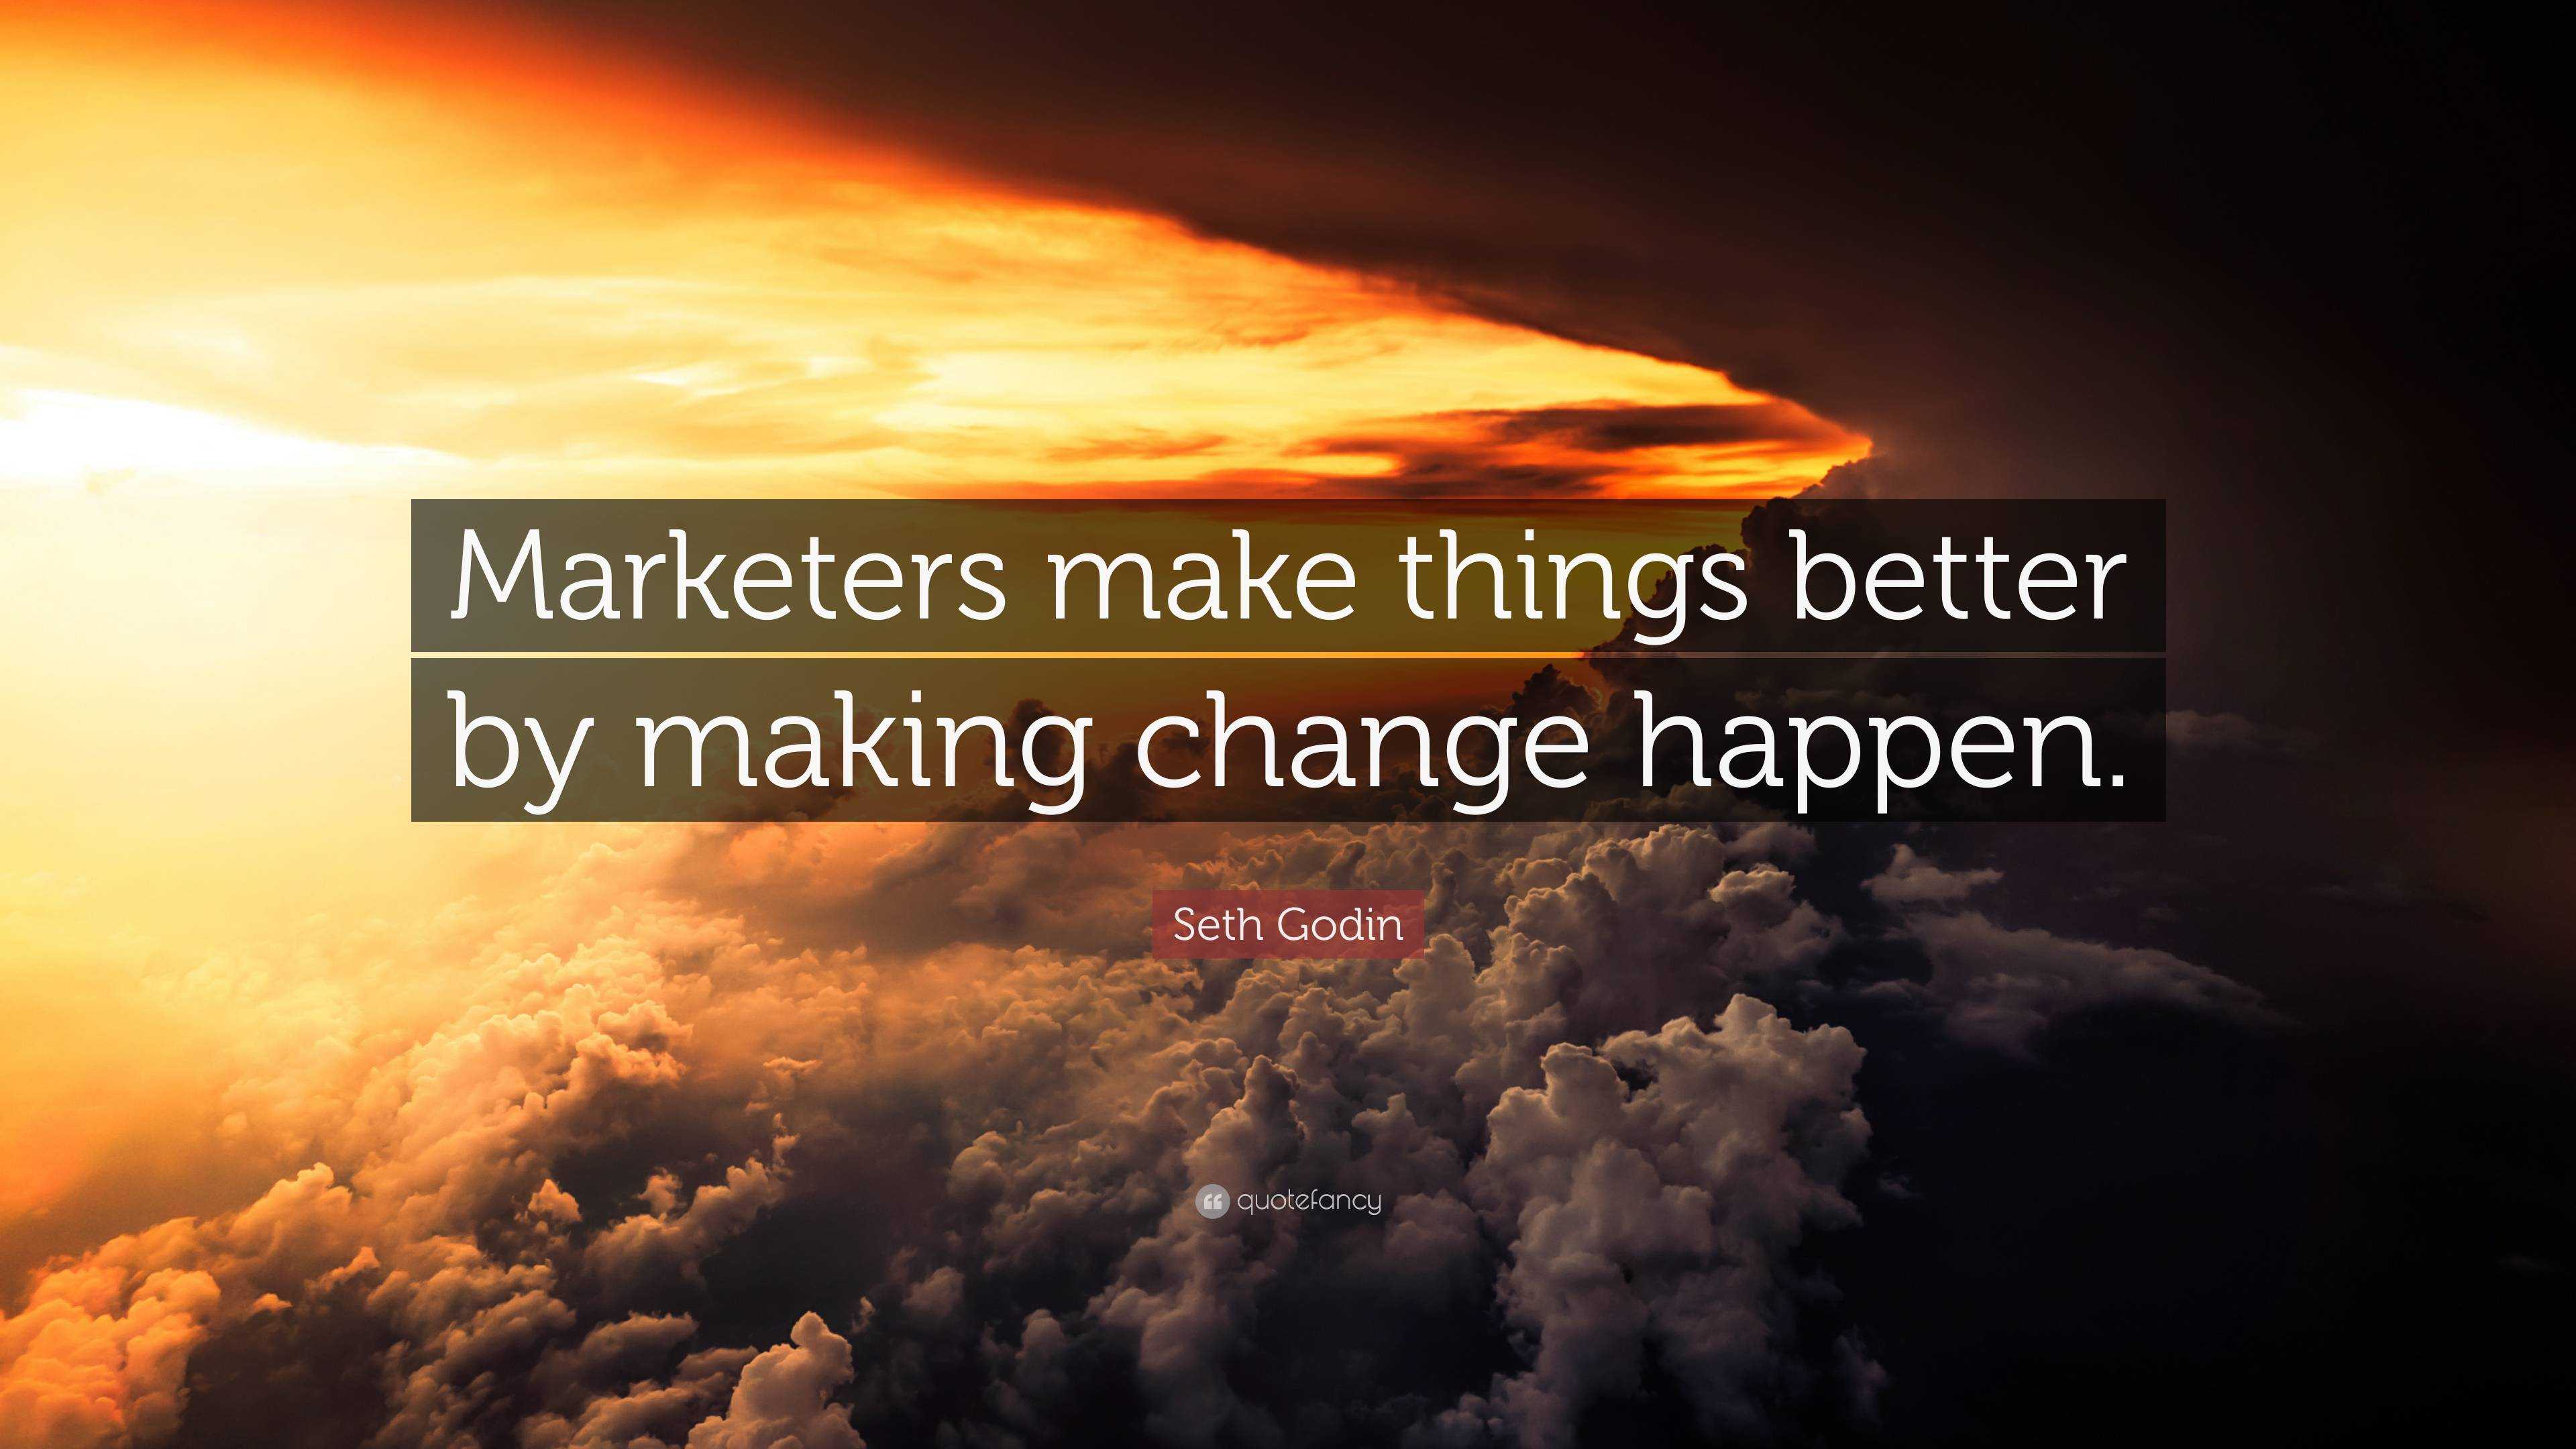 Seth Godin Quote: “Marketers make things better by making change happen.”